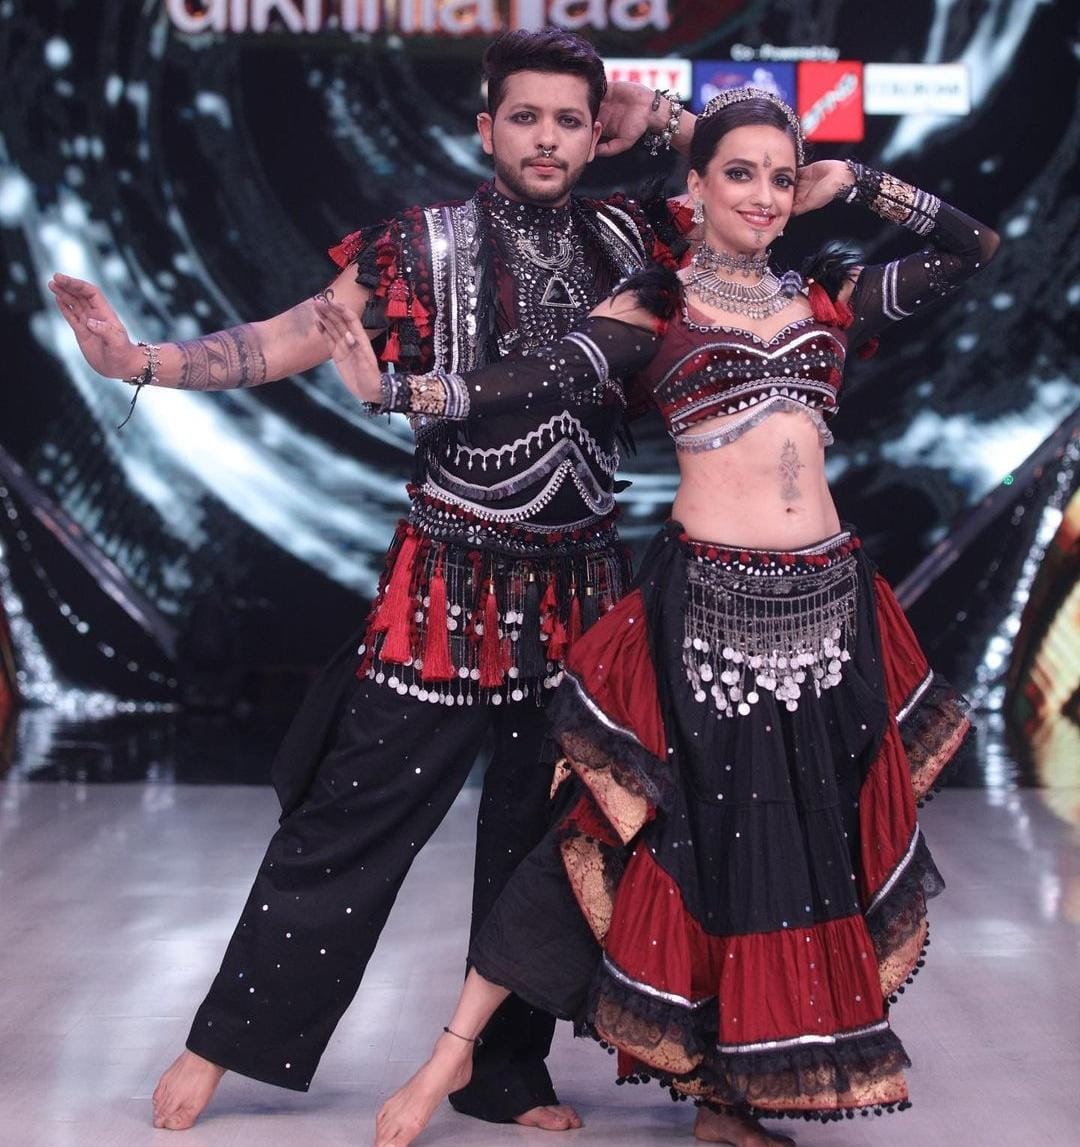 'Belly dancing suits women but you kept the masculinity,' Terence Lewis lauds Nishant Bhat’s performance on Jhalak Dikhhla Jaa 10